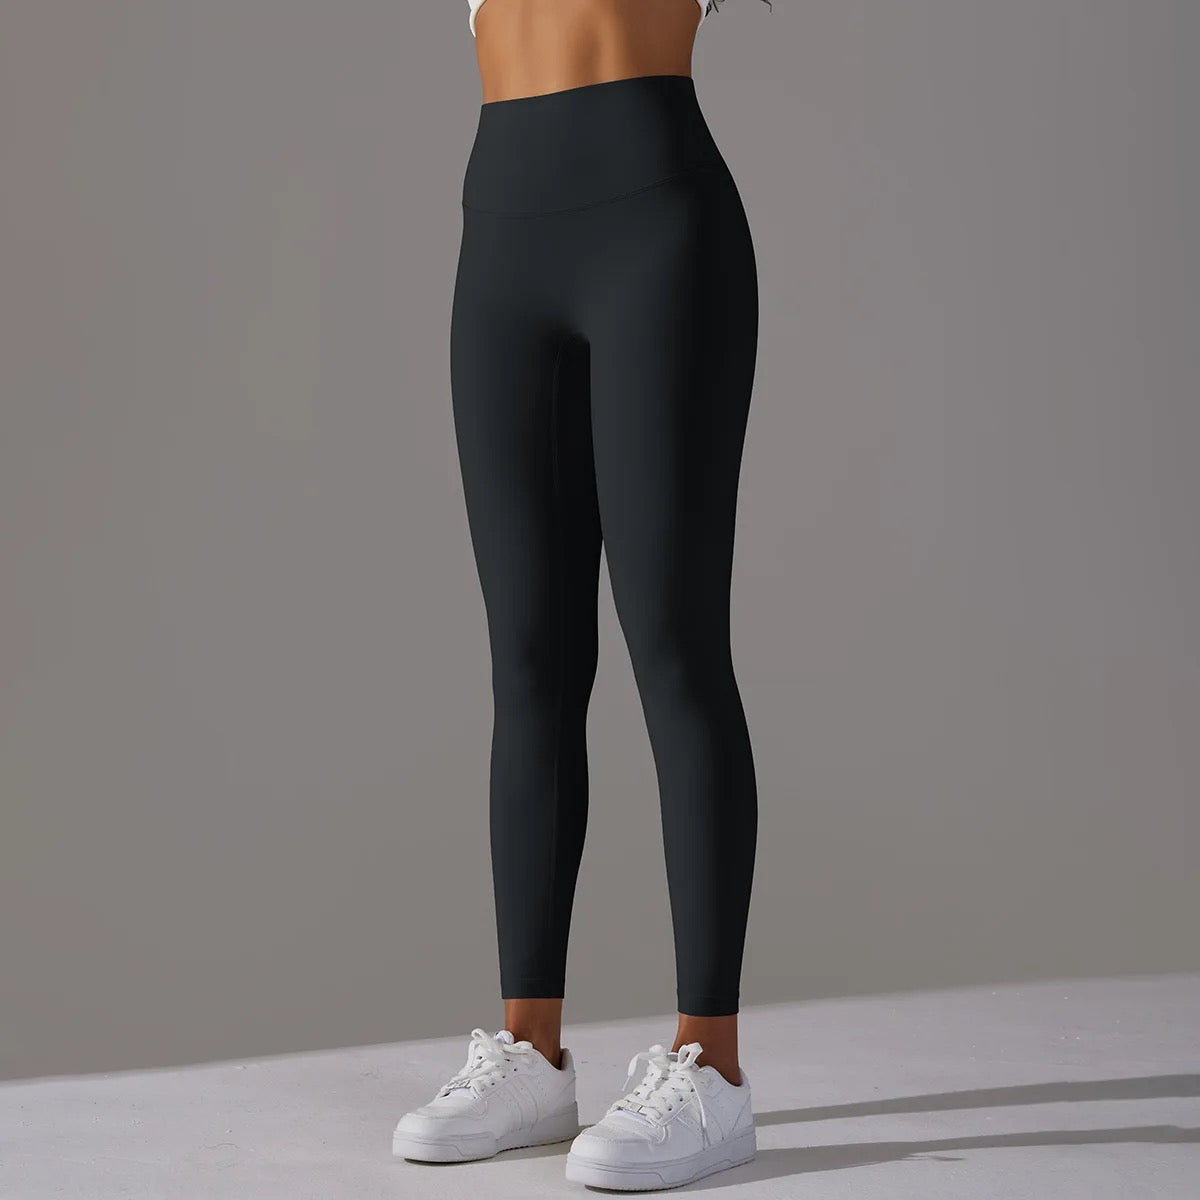  HLY128SZ-BLACK-S High Waisted ActiveFlex Athletic Yoga Leggings-Black,  Small : Clothing, Shoes & Jewelry